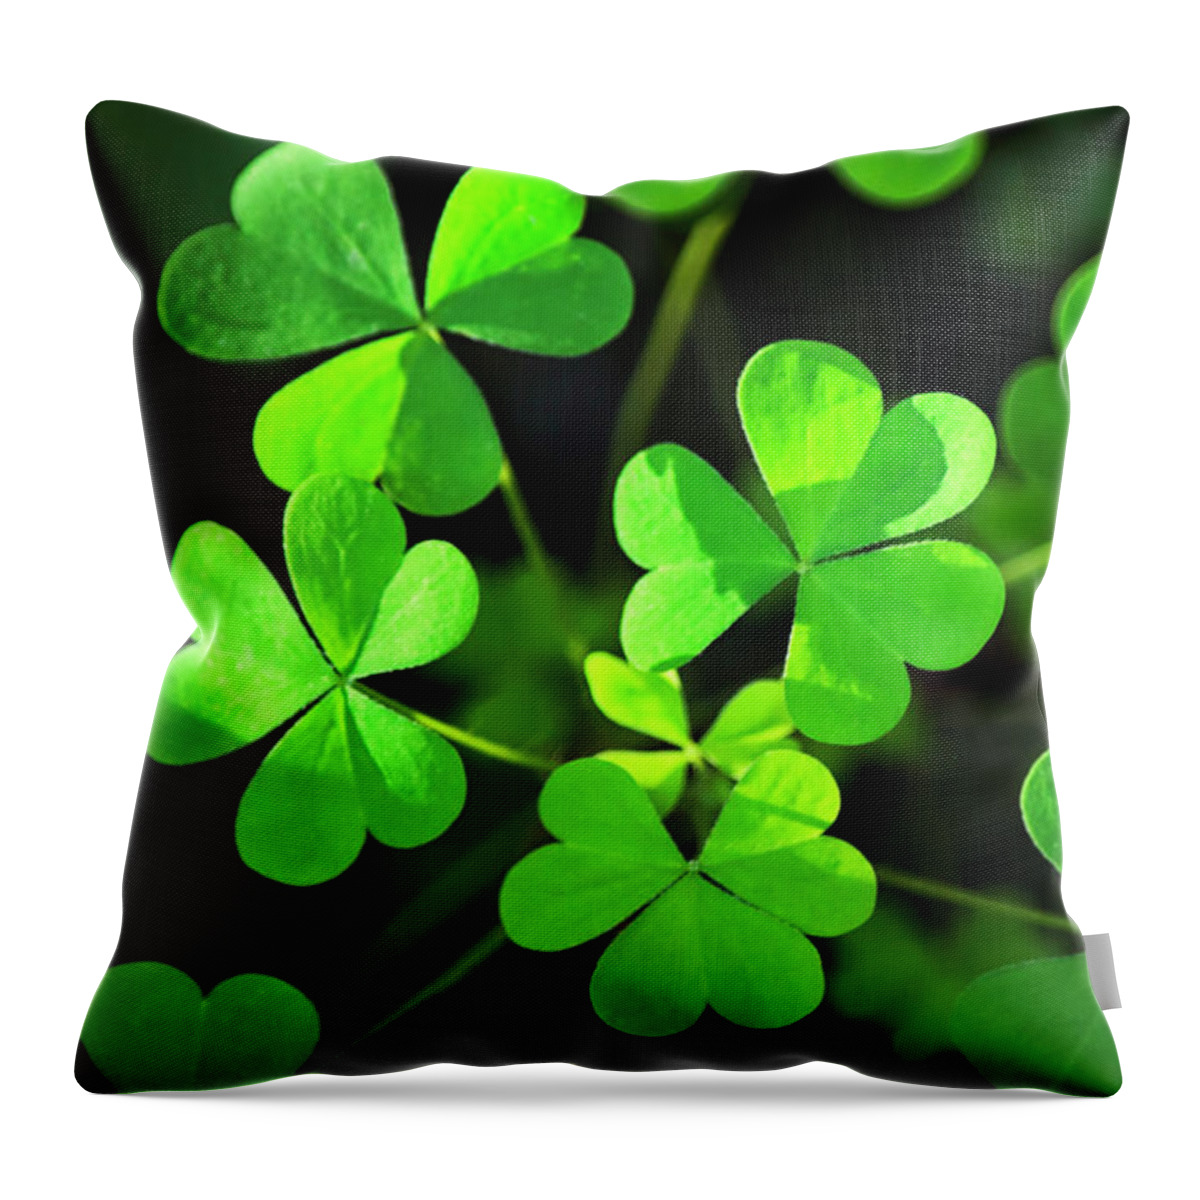 Clover Throw Pillow featuring the photograph Green Clover by Christina Rollo